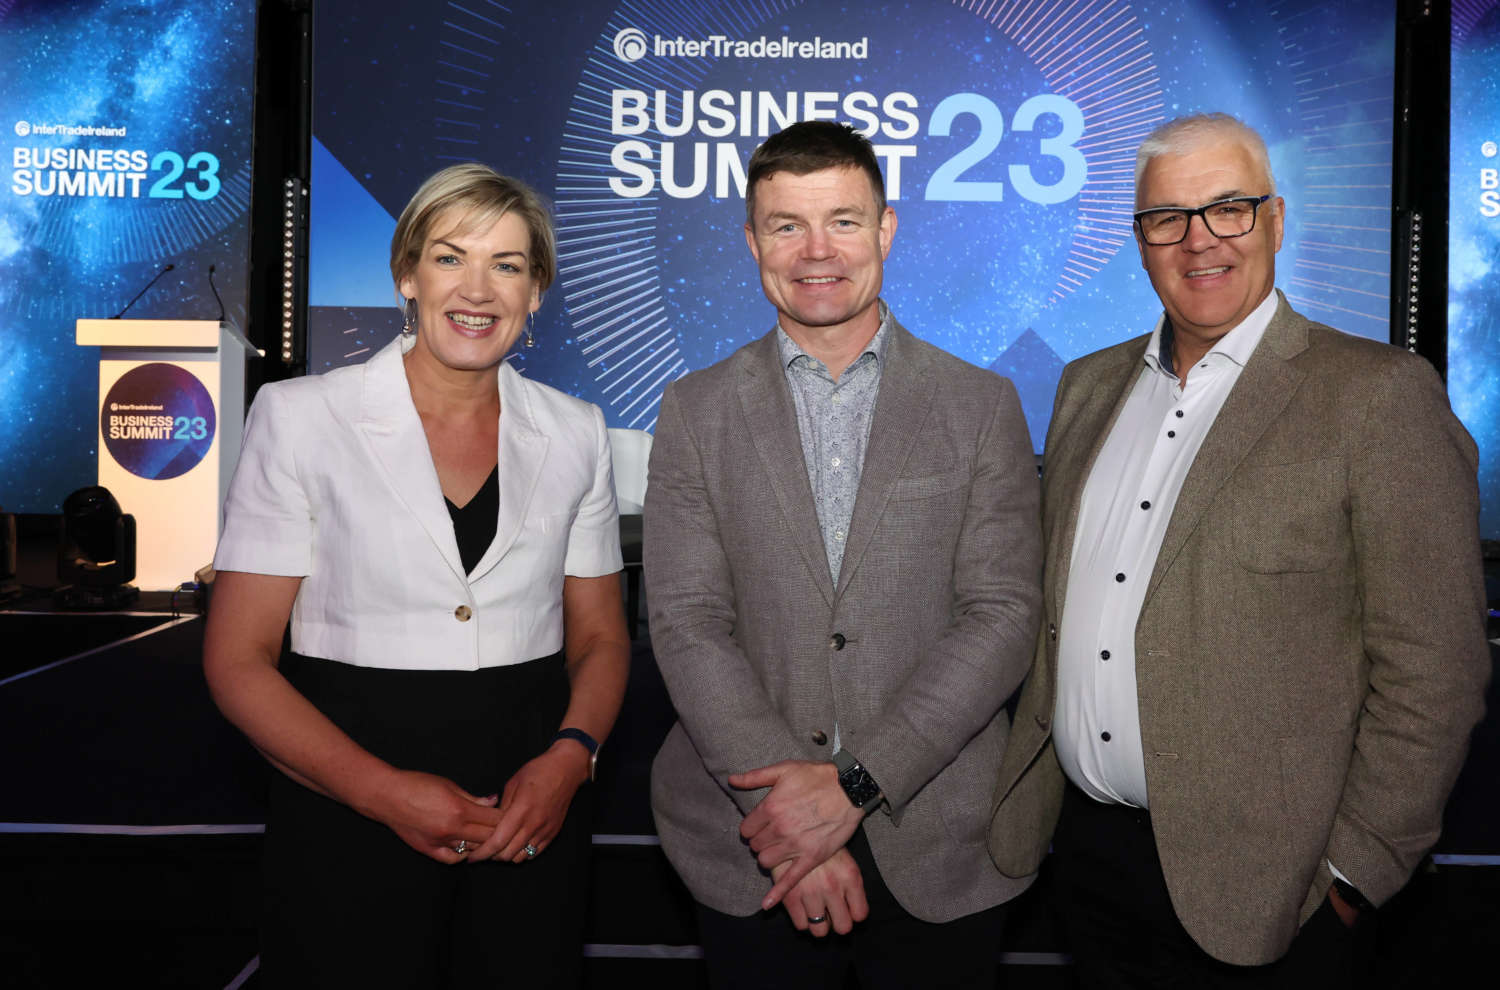 Pictured left to right is Inter Trade Ireland CEO Margaret Hearty rugby legend and entrepreneur Brian O Driscoll and Inter Trade Ireland Chairman Richard Kennedy